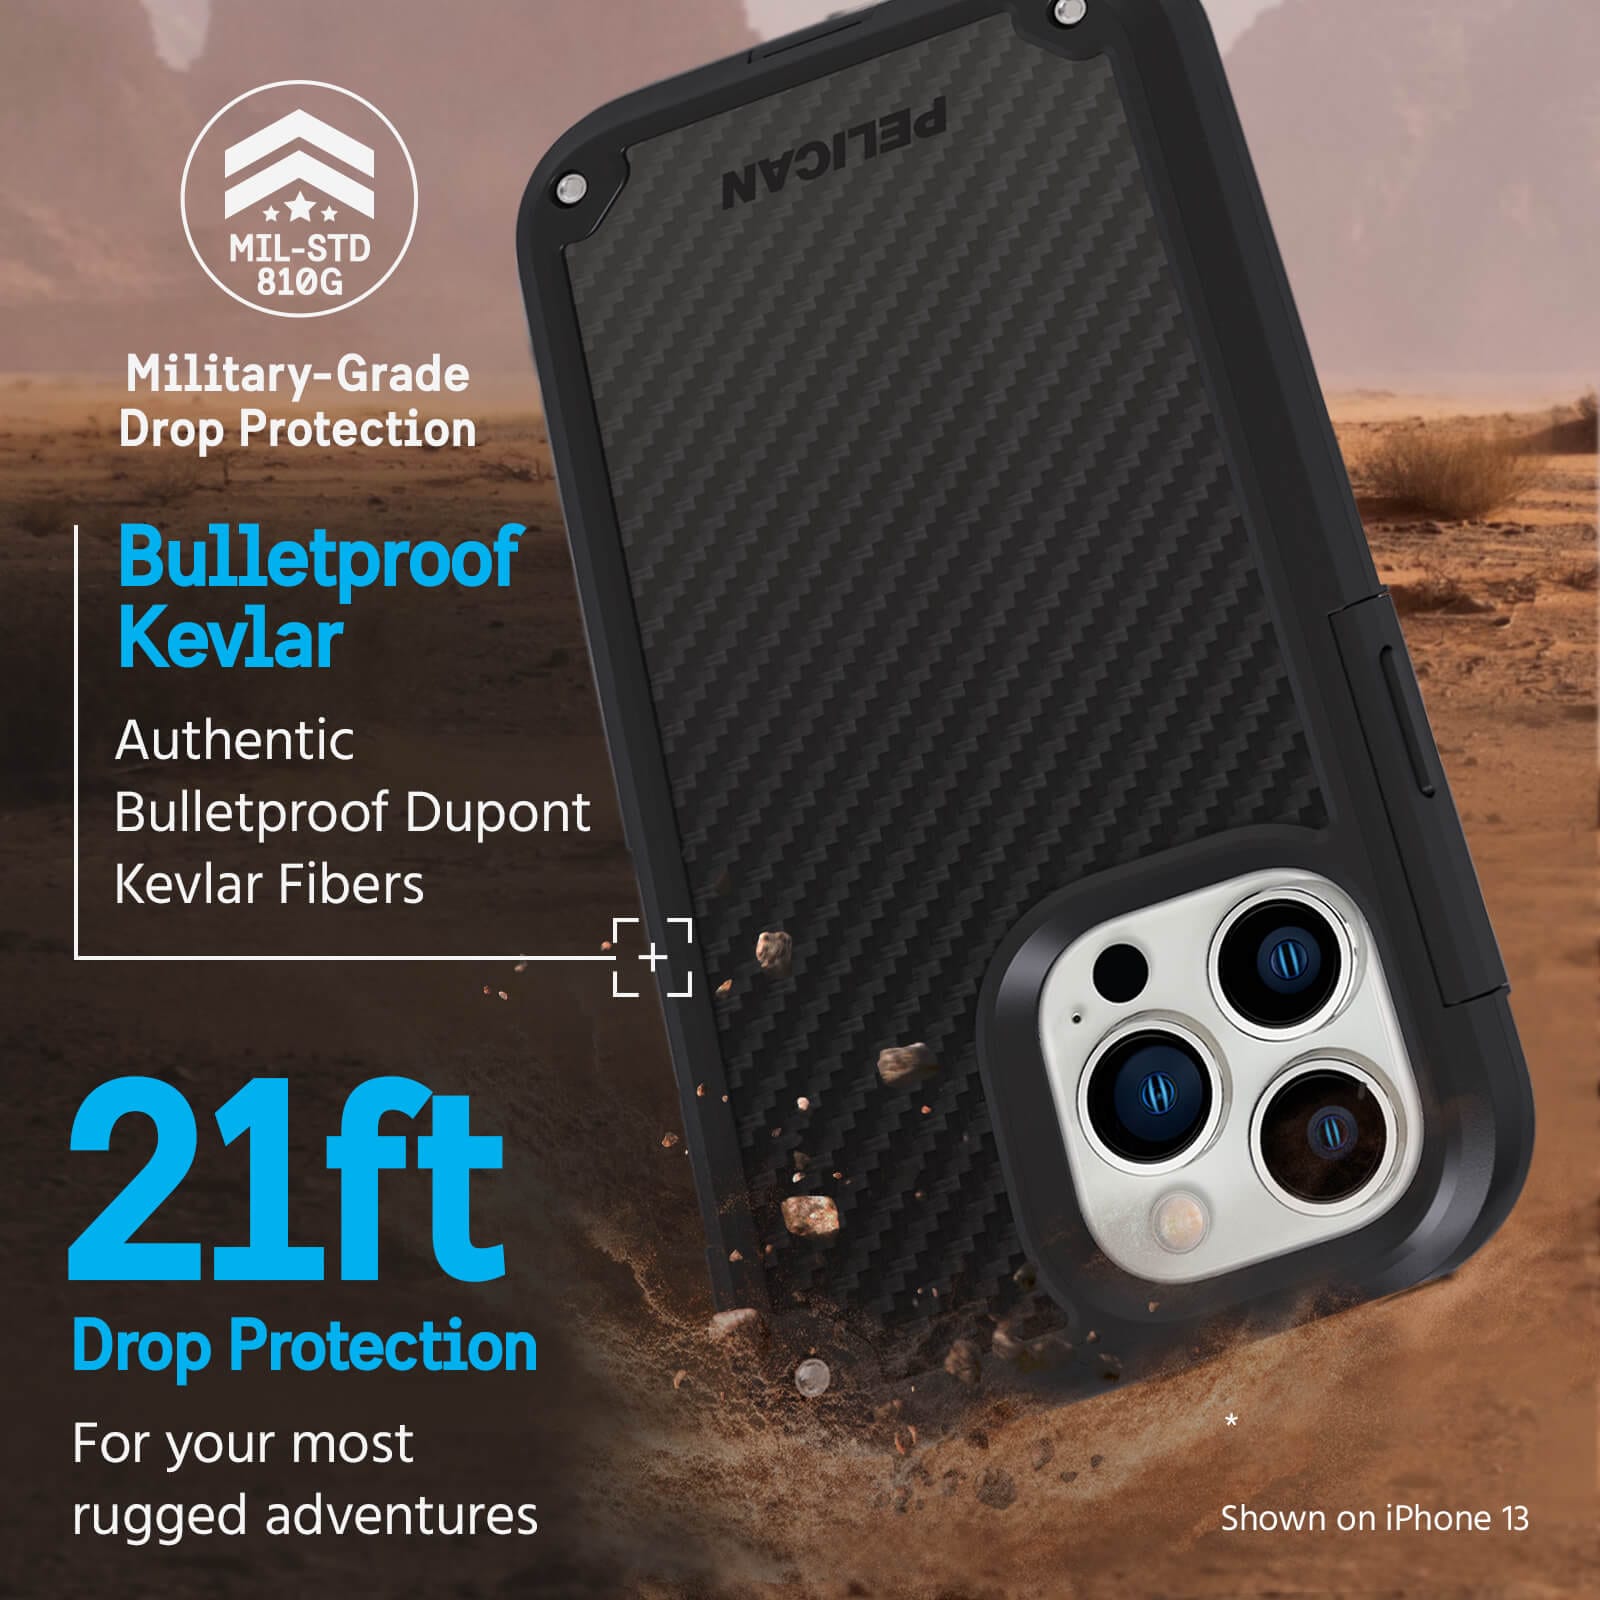 Military Grade Drop Protection. Bulletproof Kevlar. Authentic bulletproof dupont kevlar fibers. 21ft drop protection for your most rugged adventures. shown on iPhone 13. color::Black